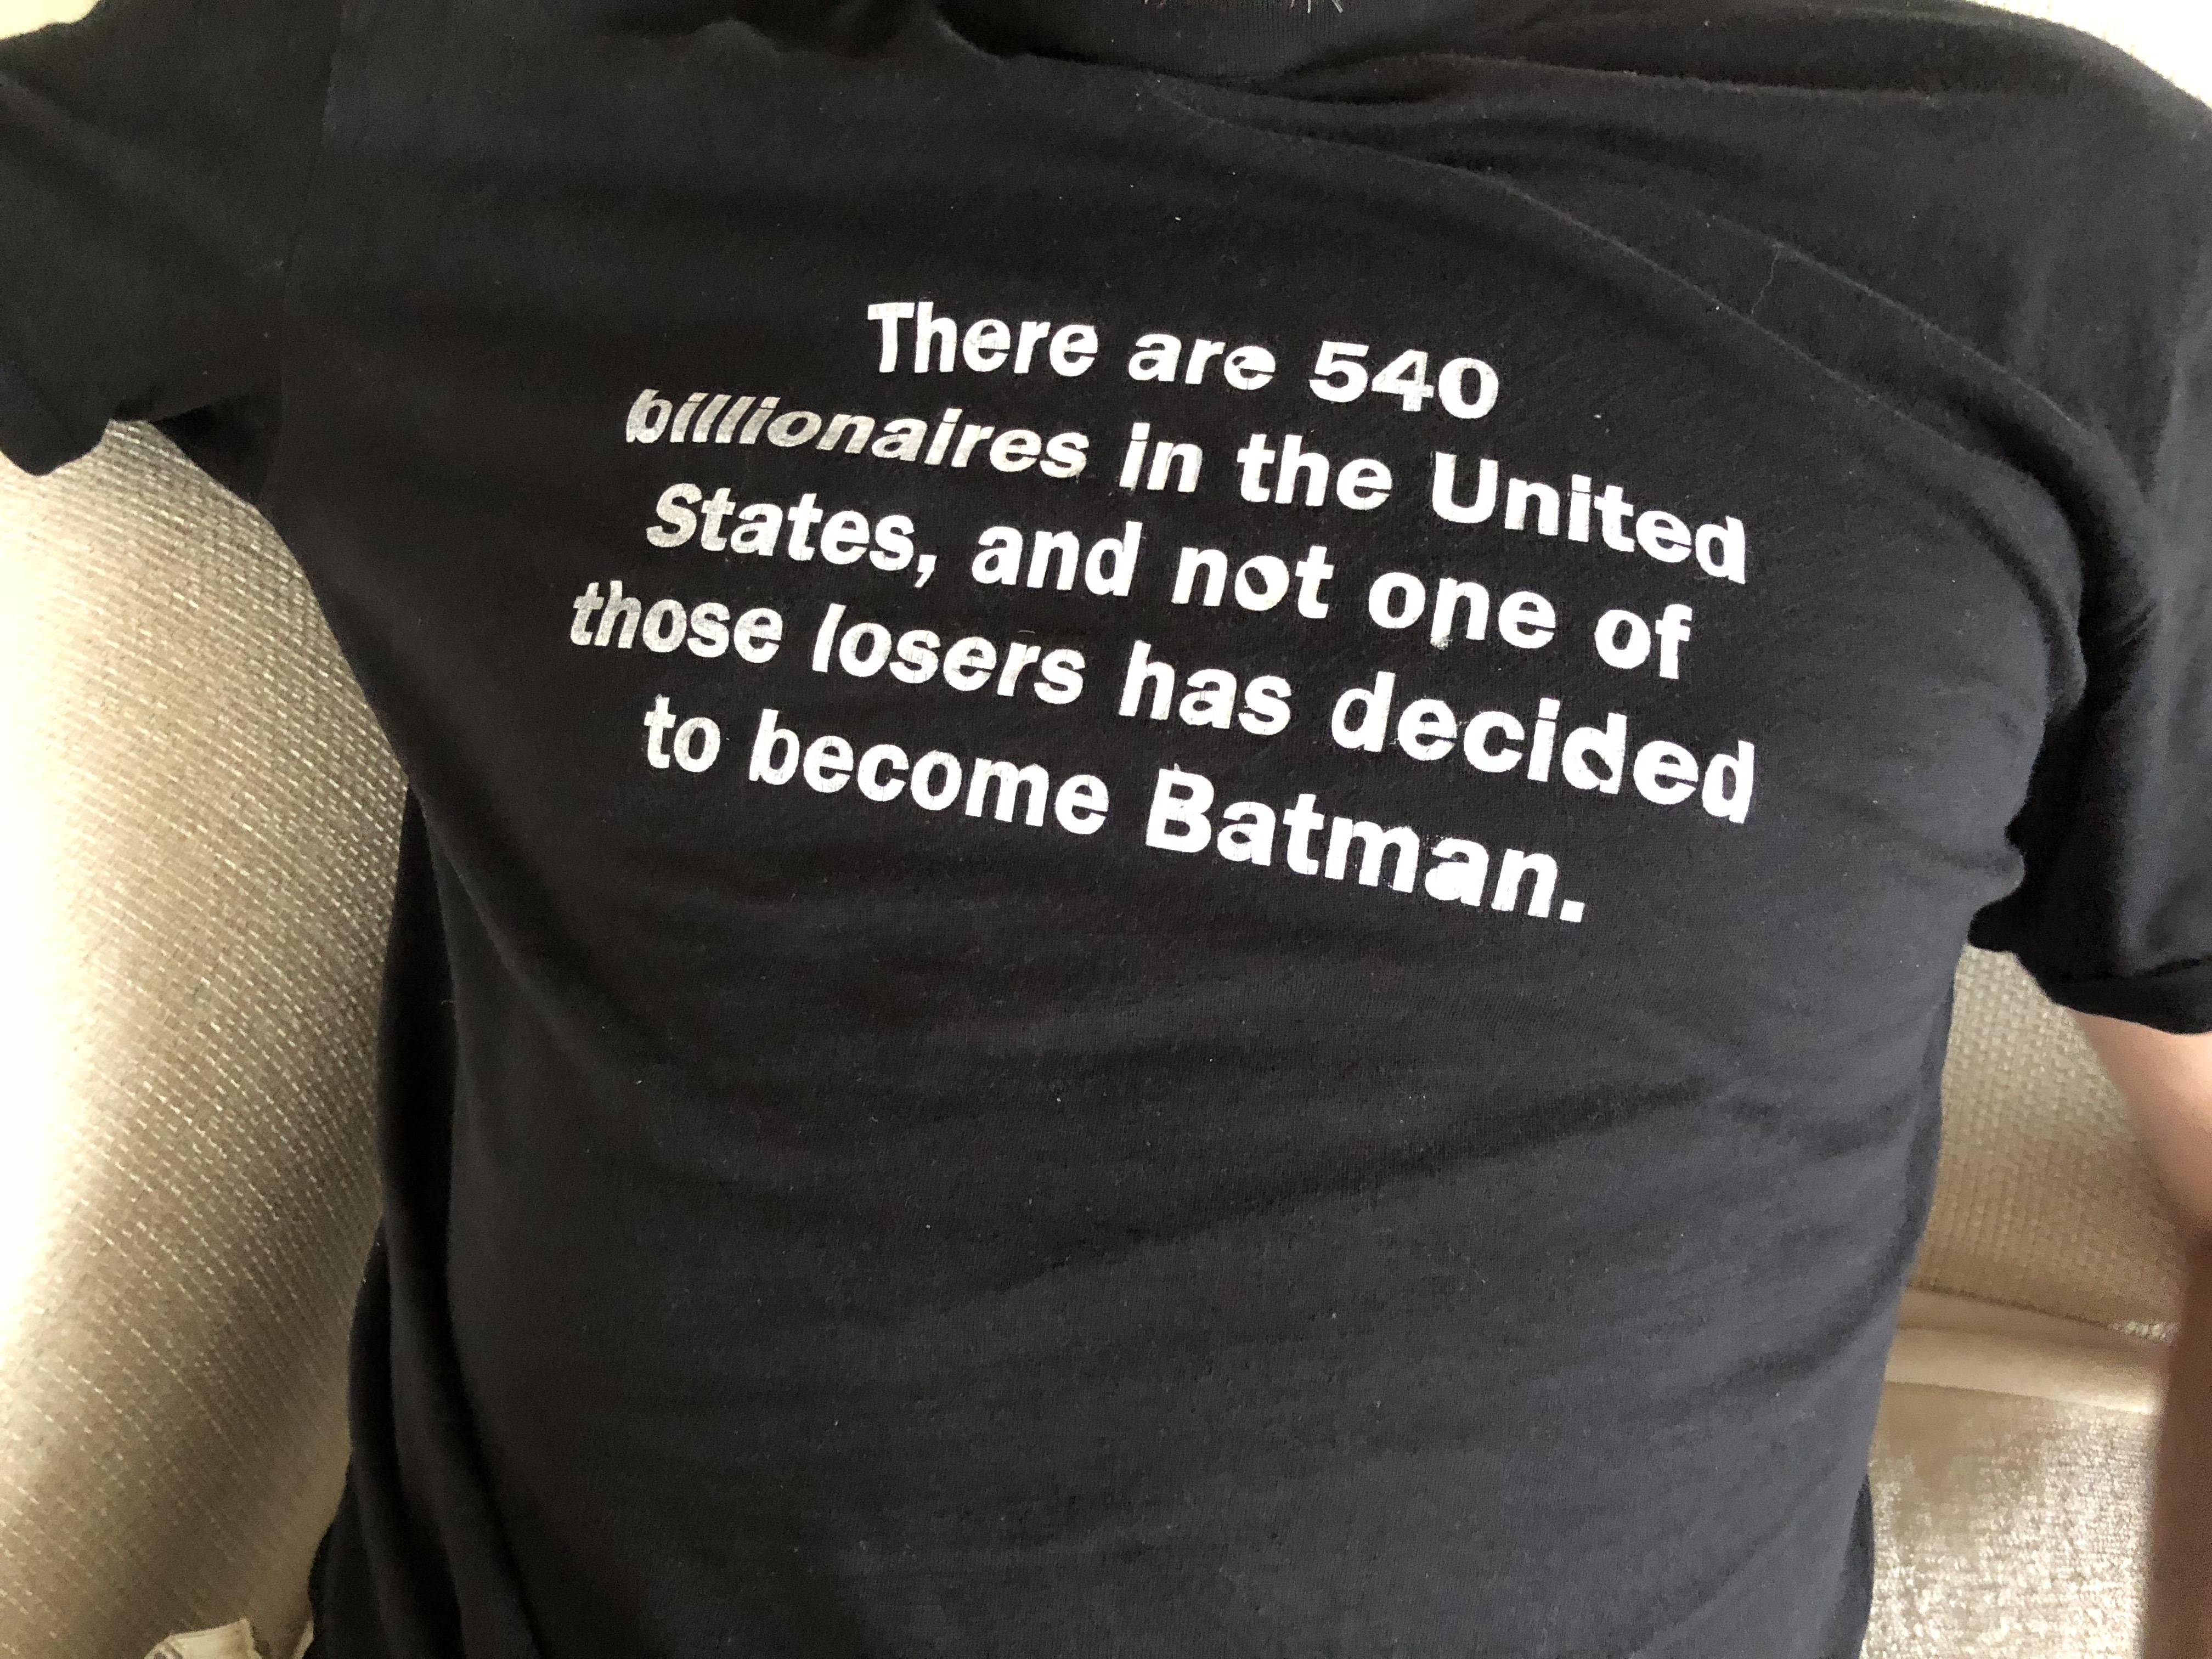 There are 540 billionaires... Jeff’s t-shirt